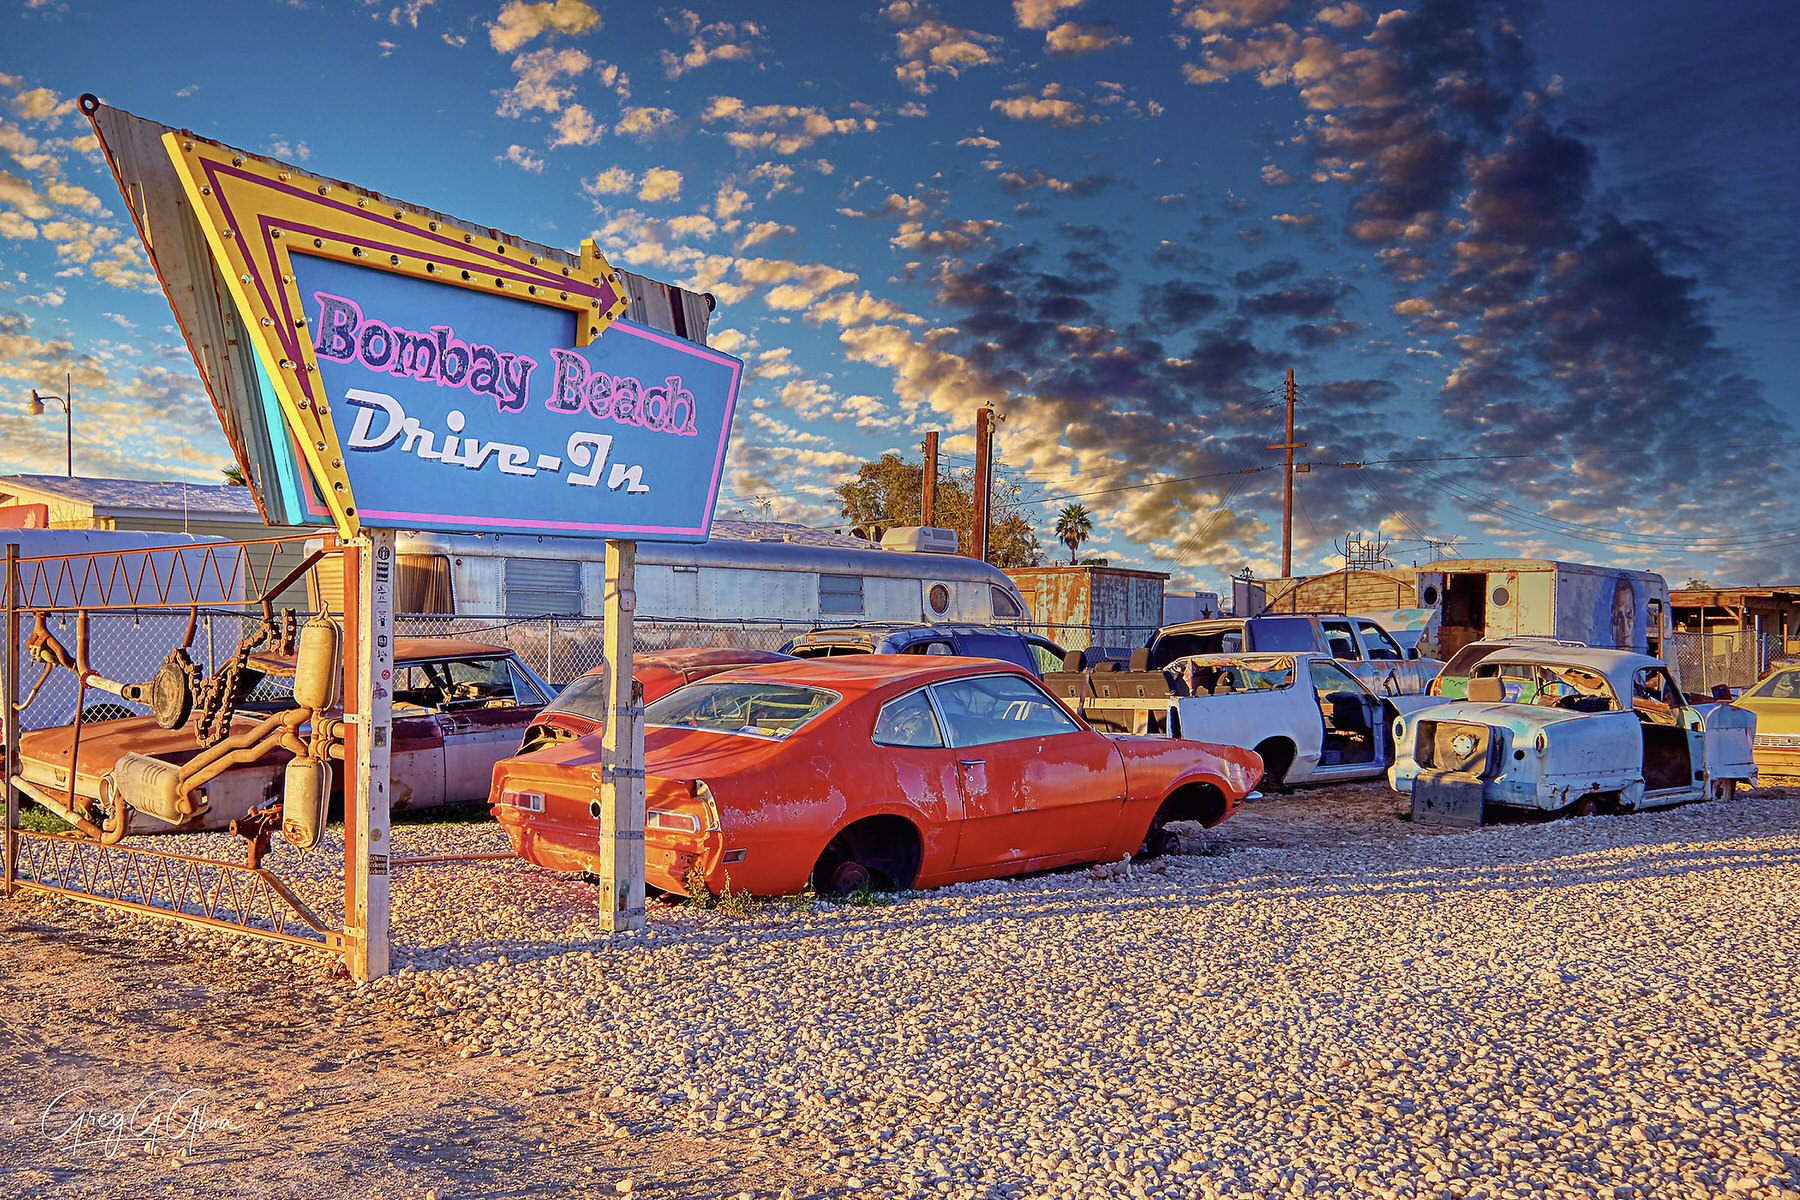 Bombay Beach Drive In is shown with vintage cars in the parking lot with the neon marquee sign and bold letters for a classic vintage photograph.